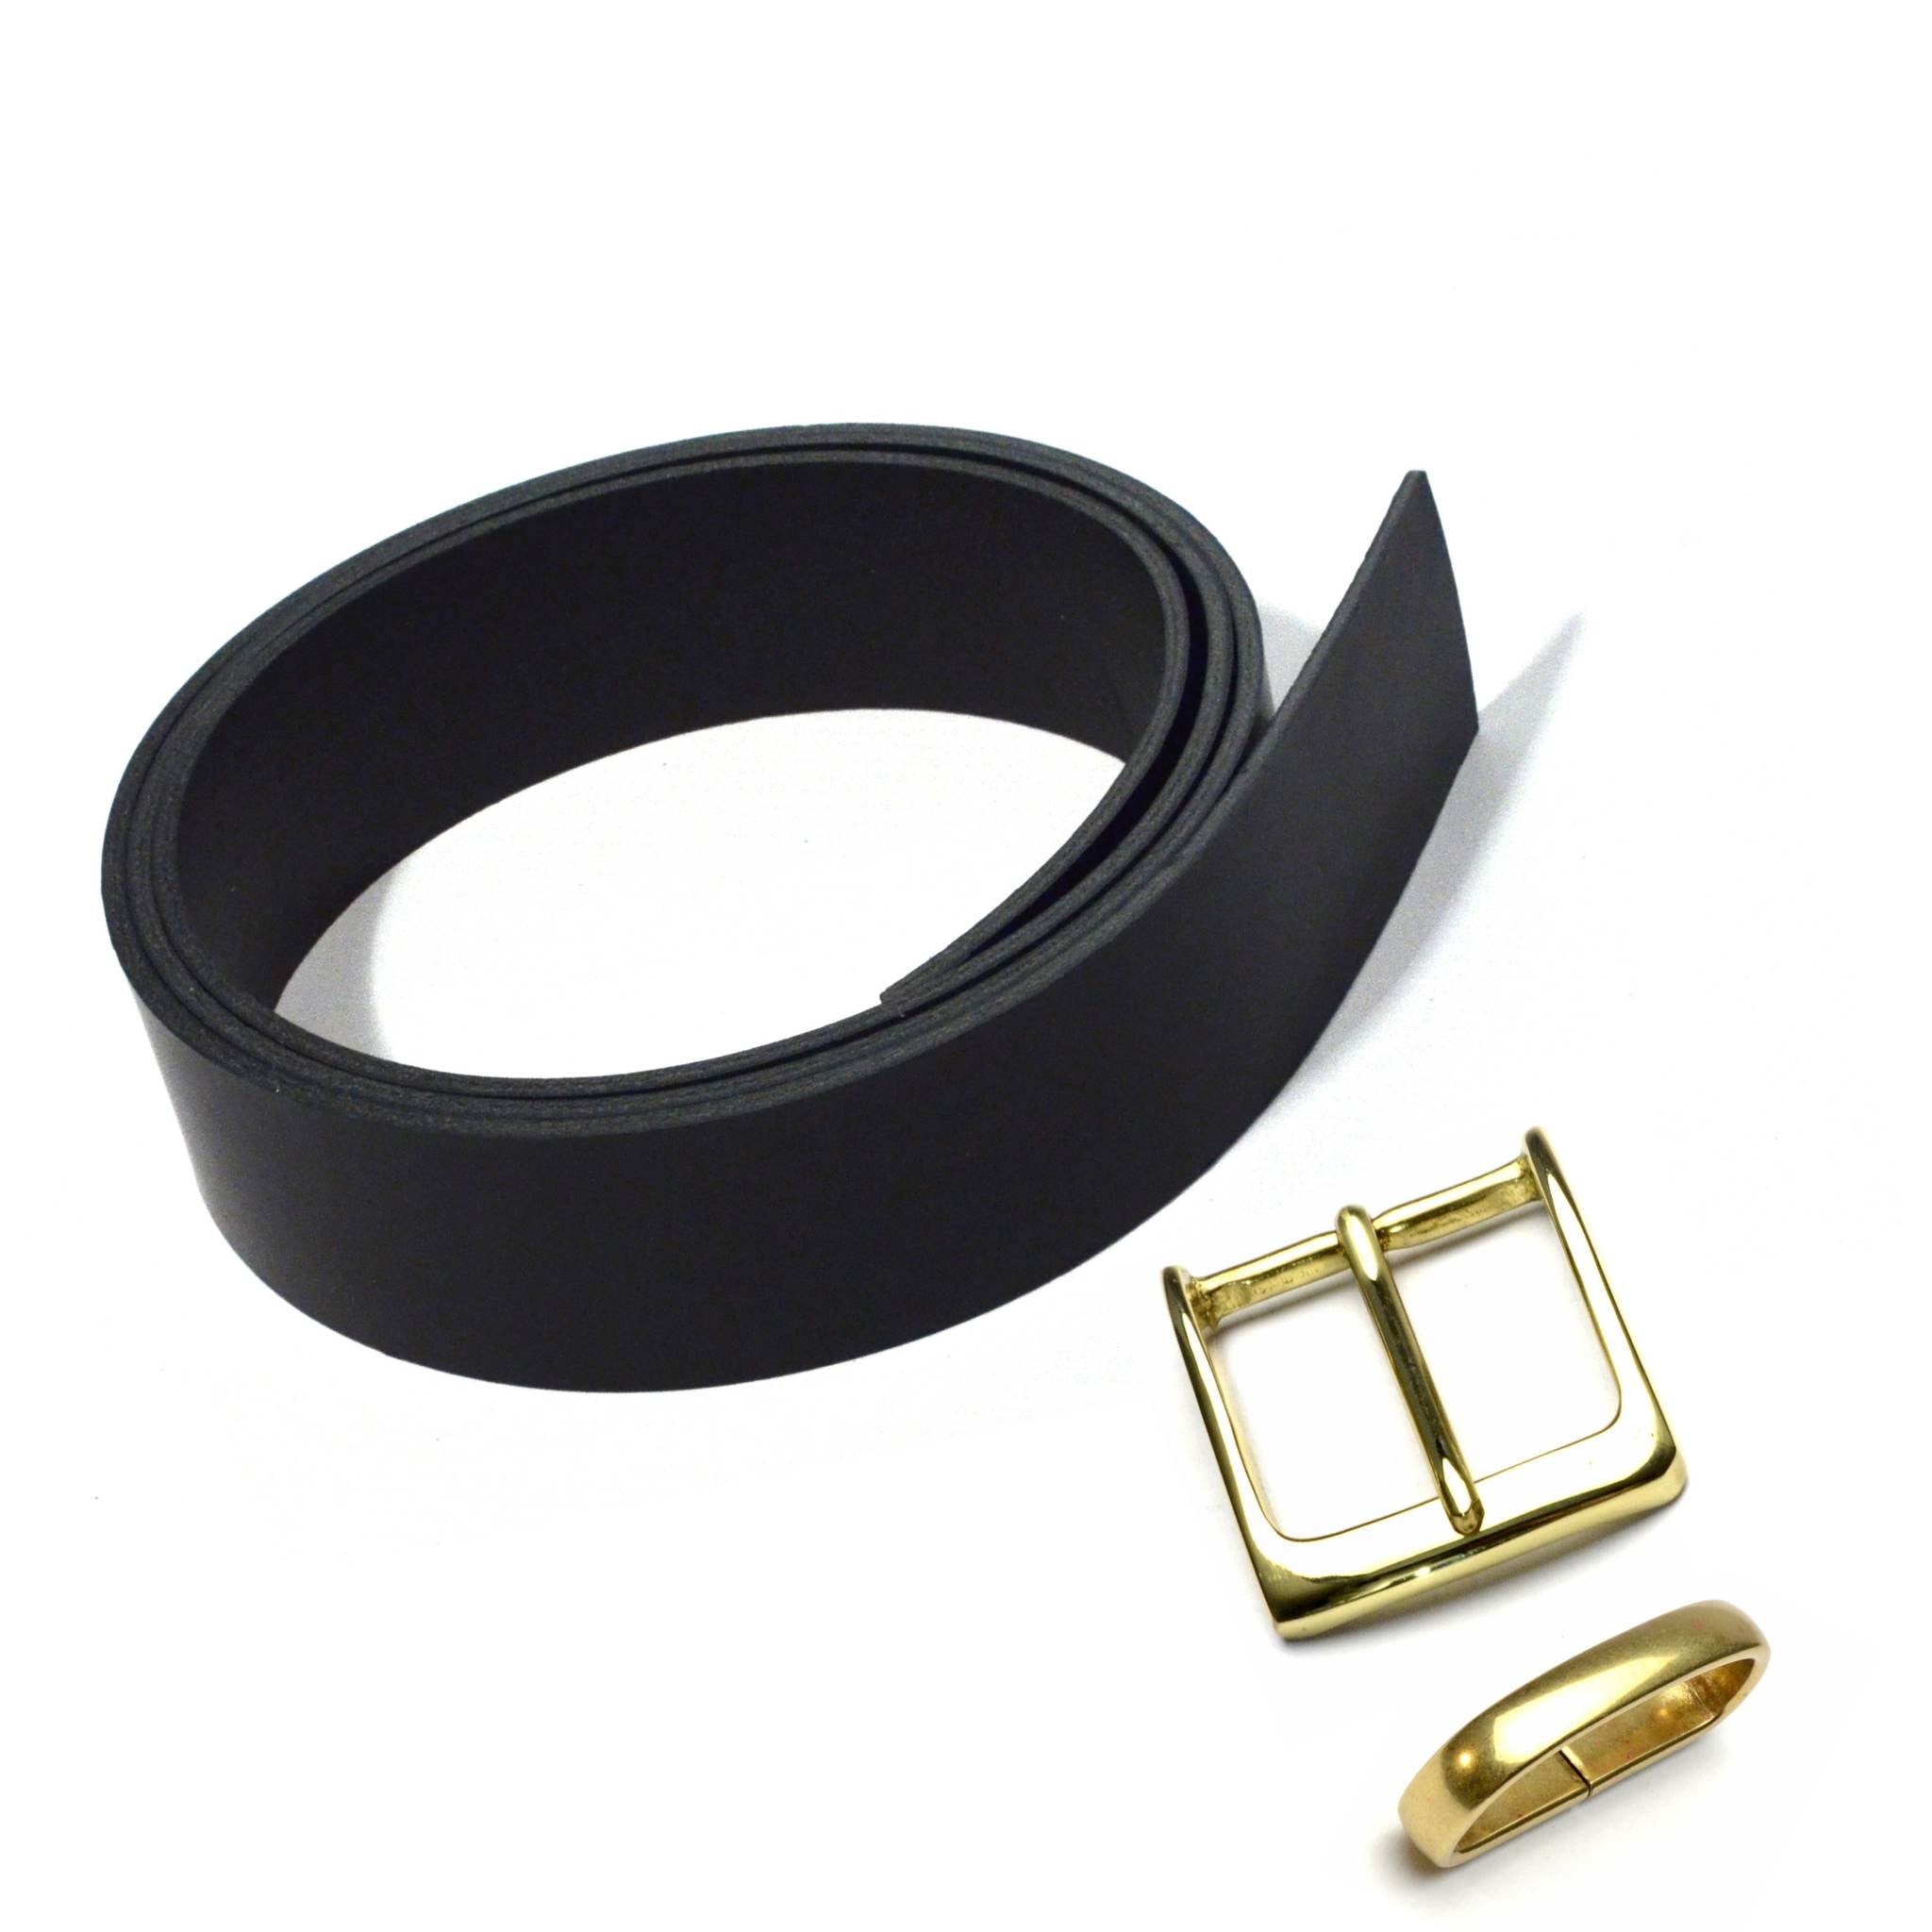 Make your own leather belt starter pack - choose from black, brown or tan with brass or nickel hardware